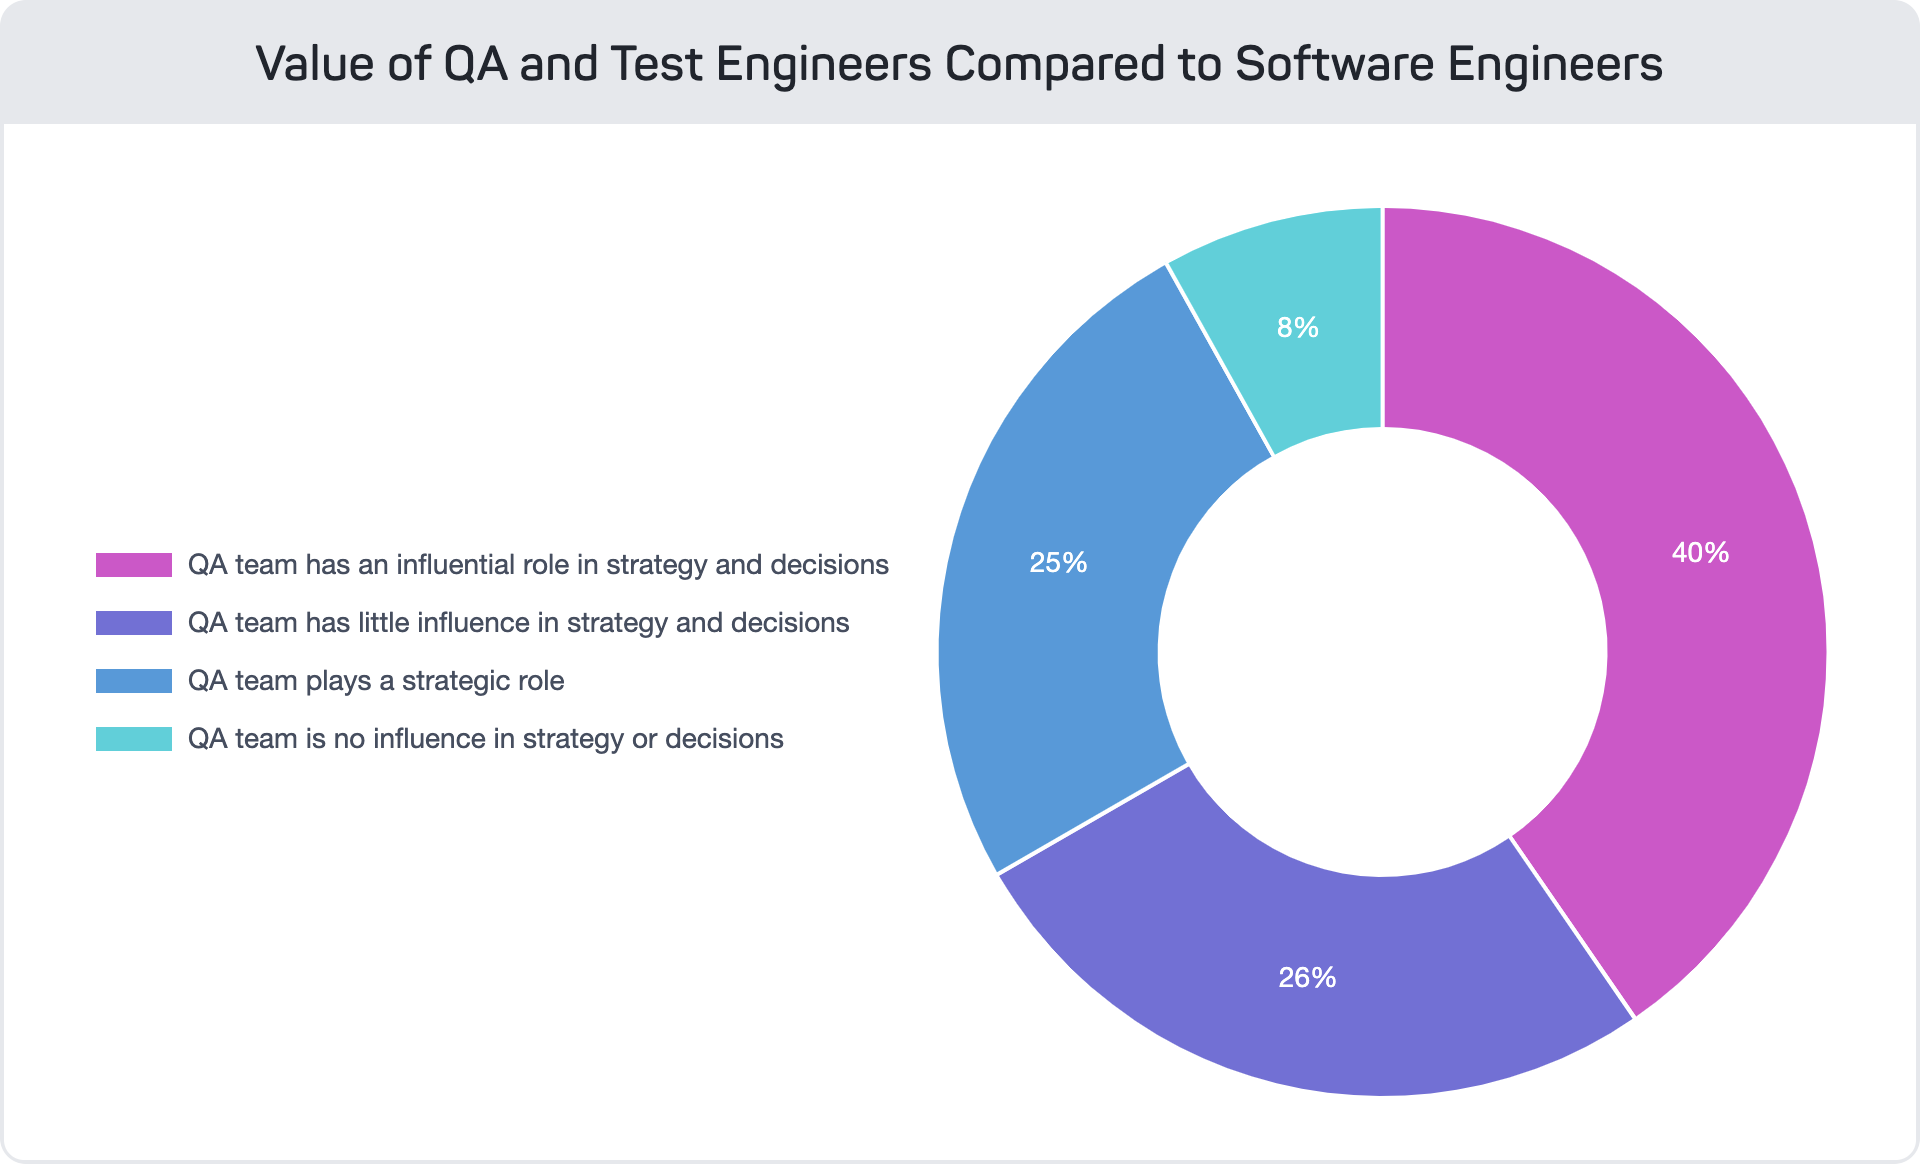 Chart of the value of QA and test engineers compared to software engineers